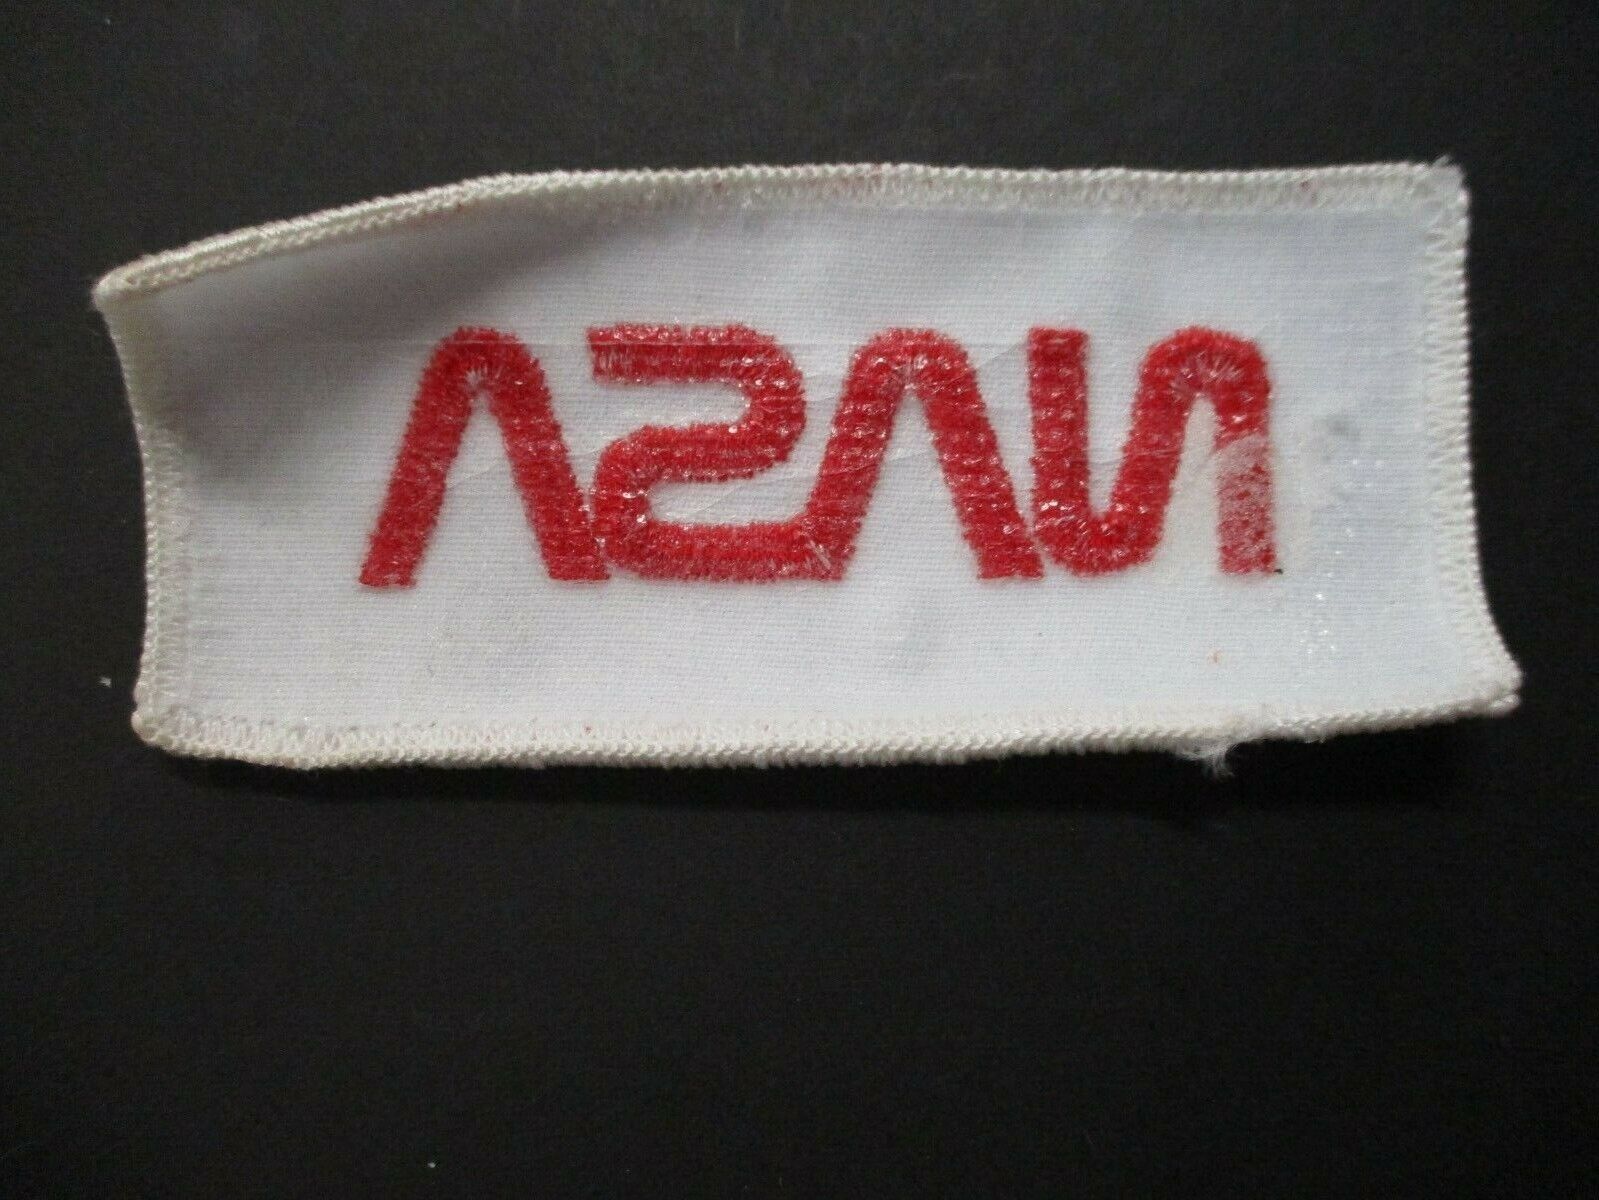 NASA Rectangle Patch Size 1.75 x 4 Inches Red and White Logo